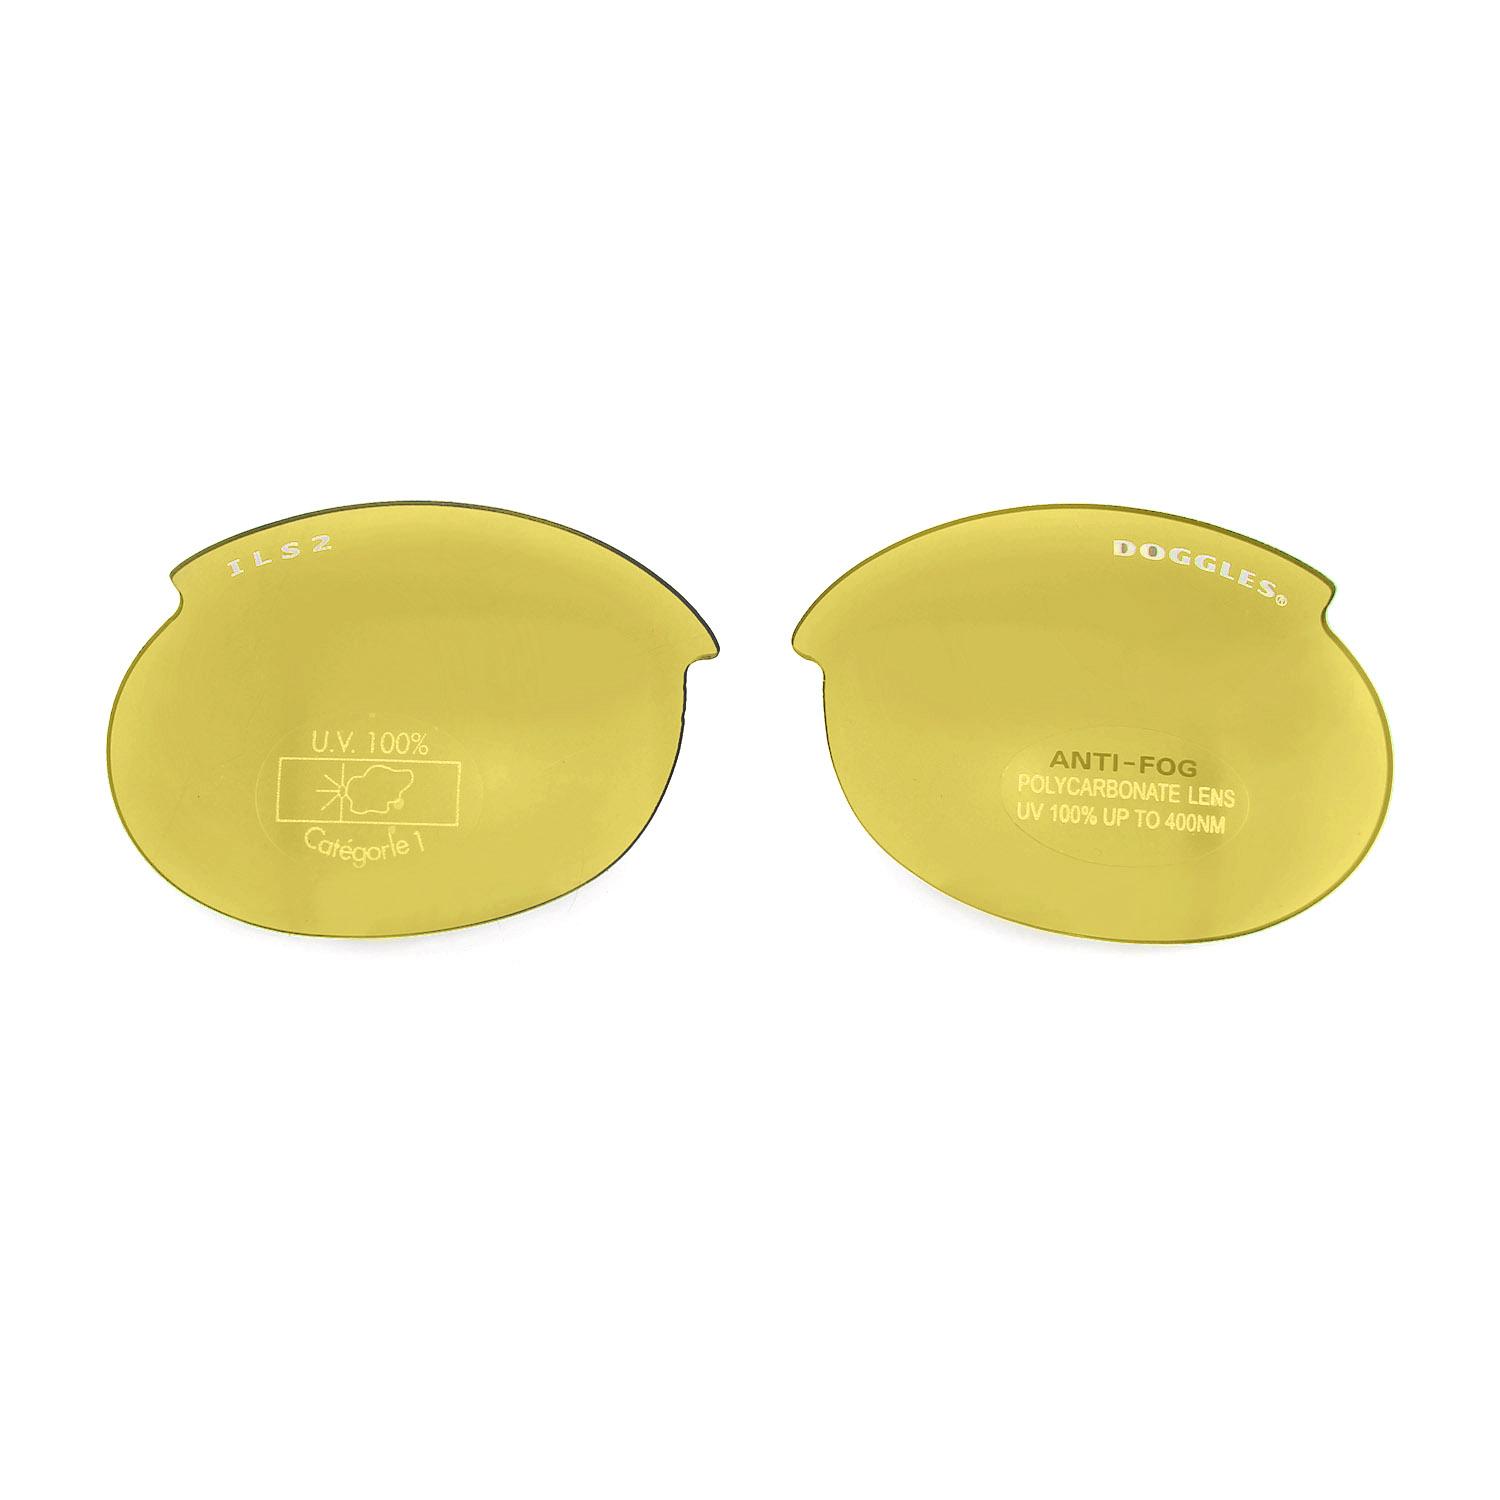 Doggles - Replacement ILS2 Lens Set - Yellow